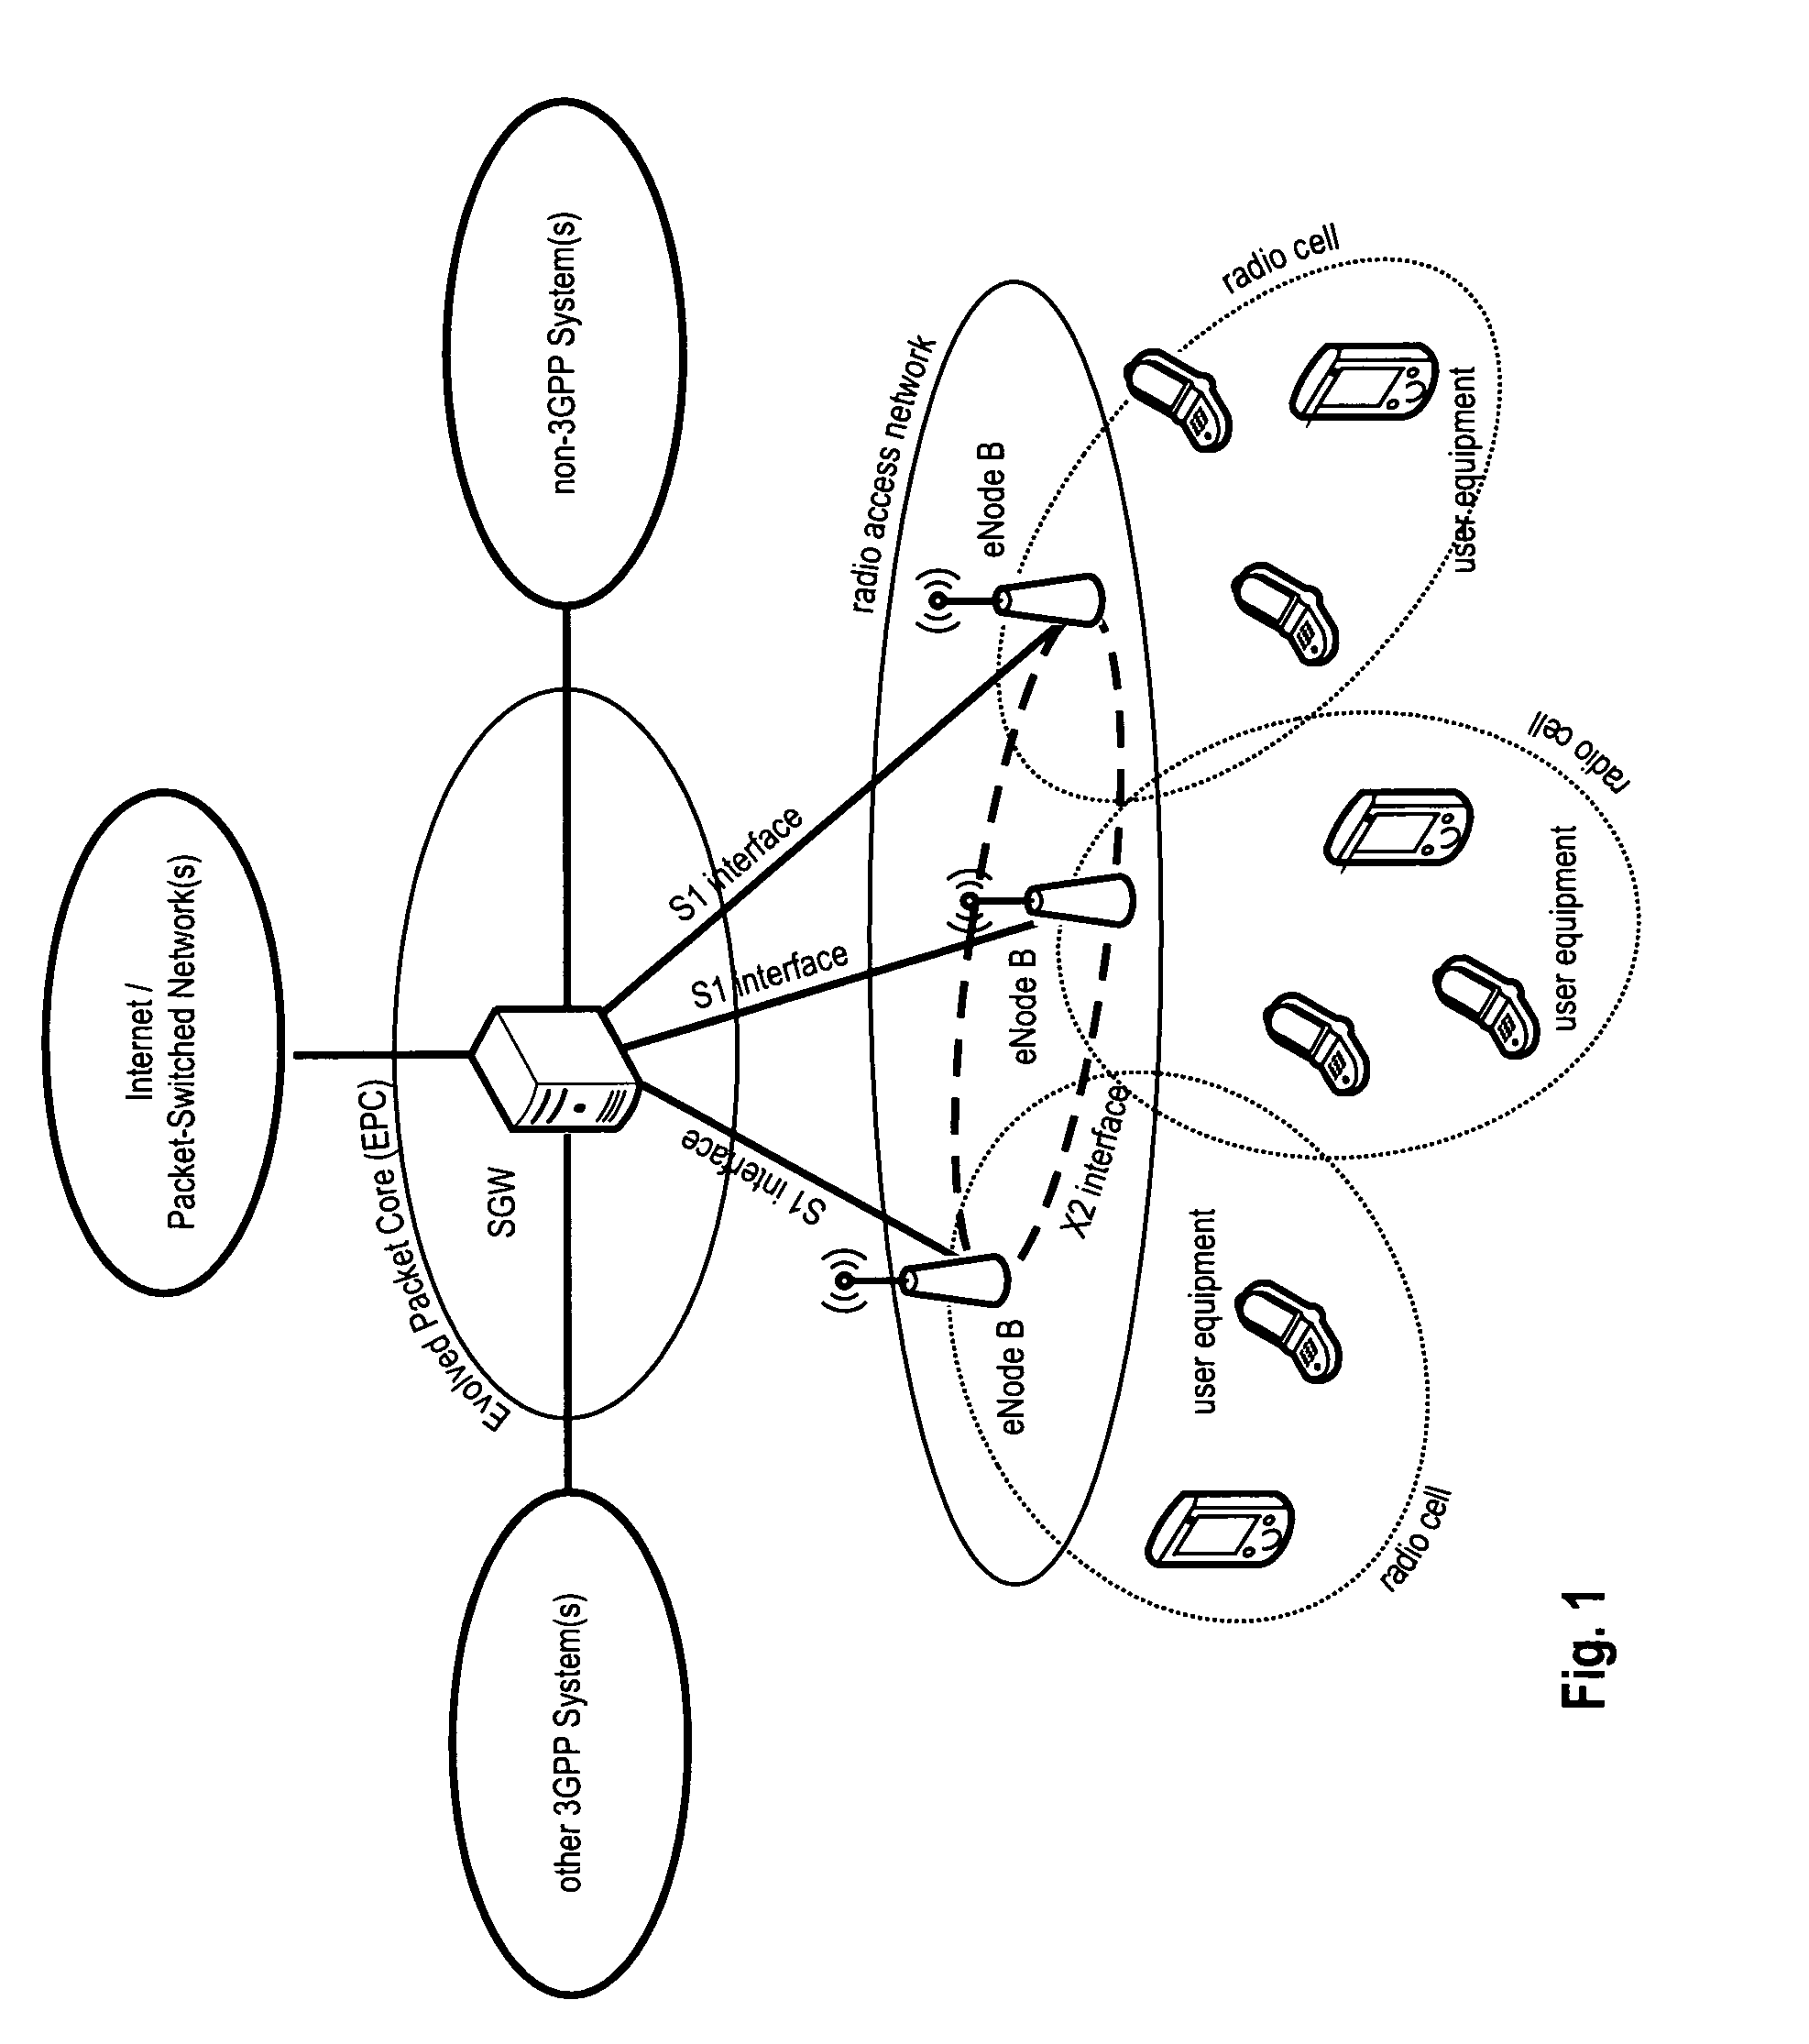 Buffer status reporting in a mobile communication system